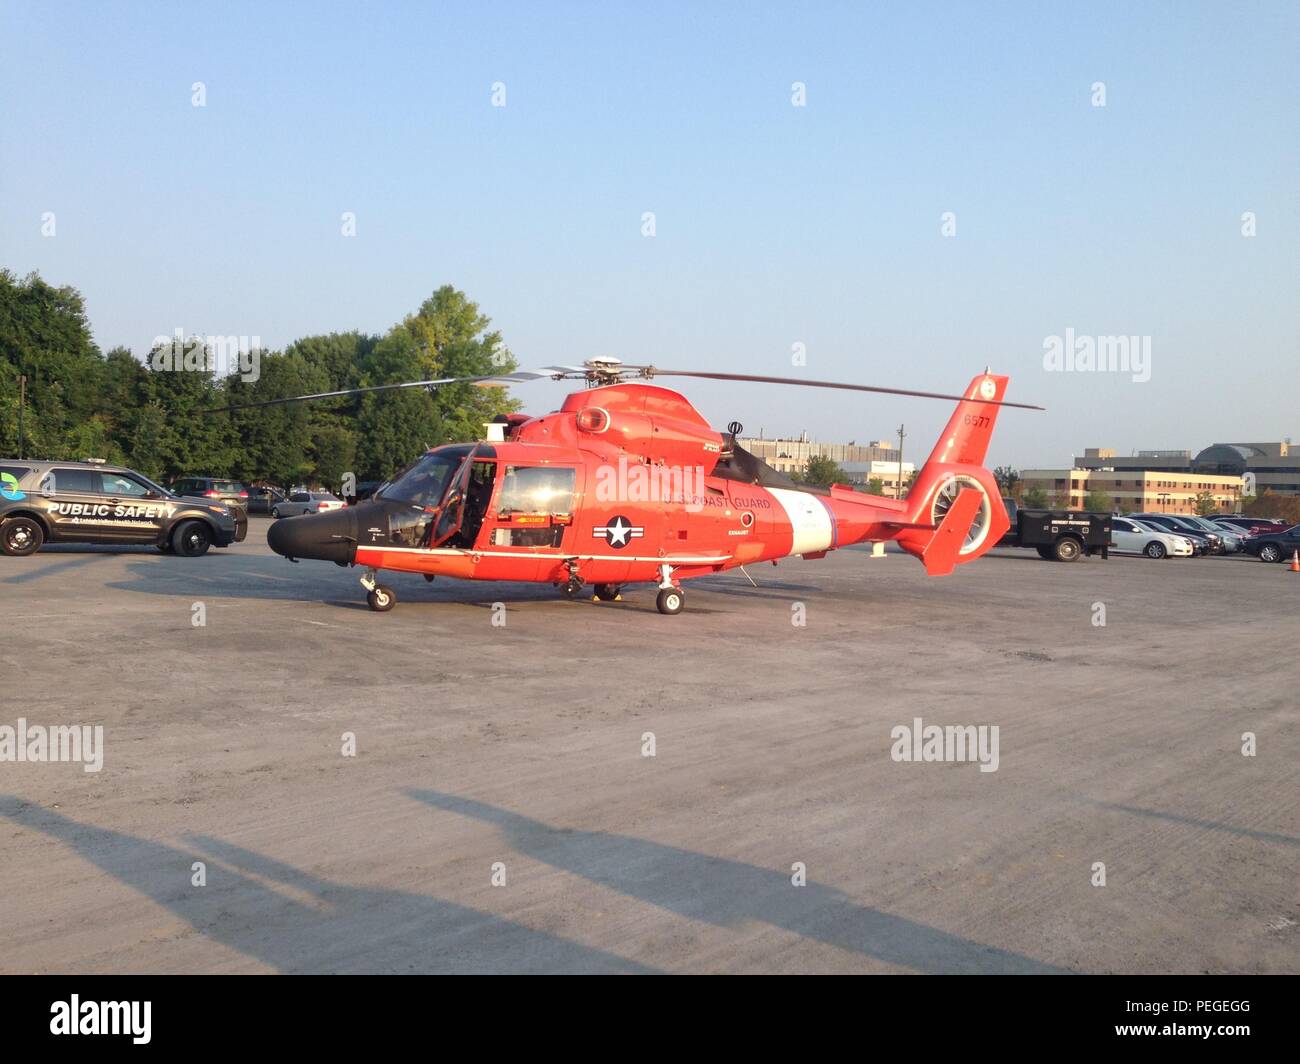 A Coast Guard MH-65 Dolphin helicopter on sits on deck at Lehigh Valley Hospital in Allentown Pa., Tuesday, Aug. 18, 2015. The aircrew medevaced a man from the Delaware Water Gap who suffered multiple injuries after falling from a tree. (U.S. Coast Guard photo by LT Christopher Hooper) Stock Photo